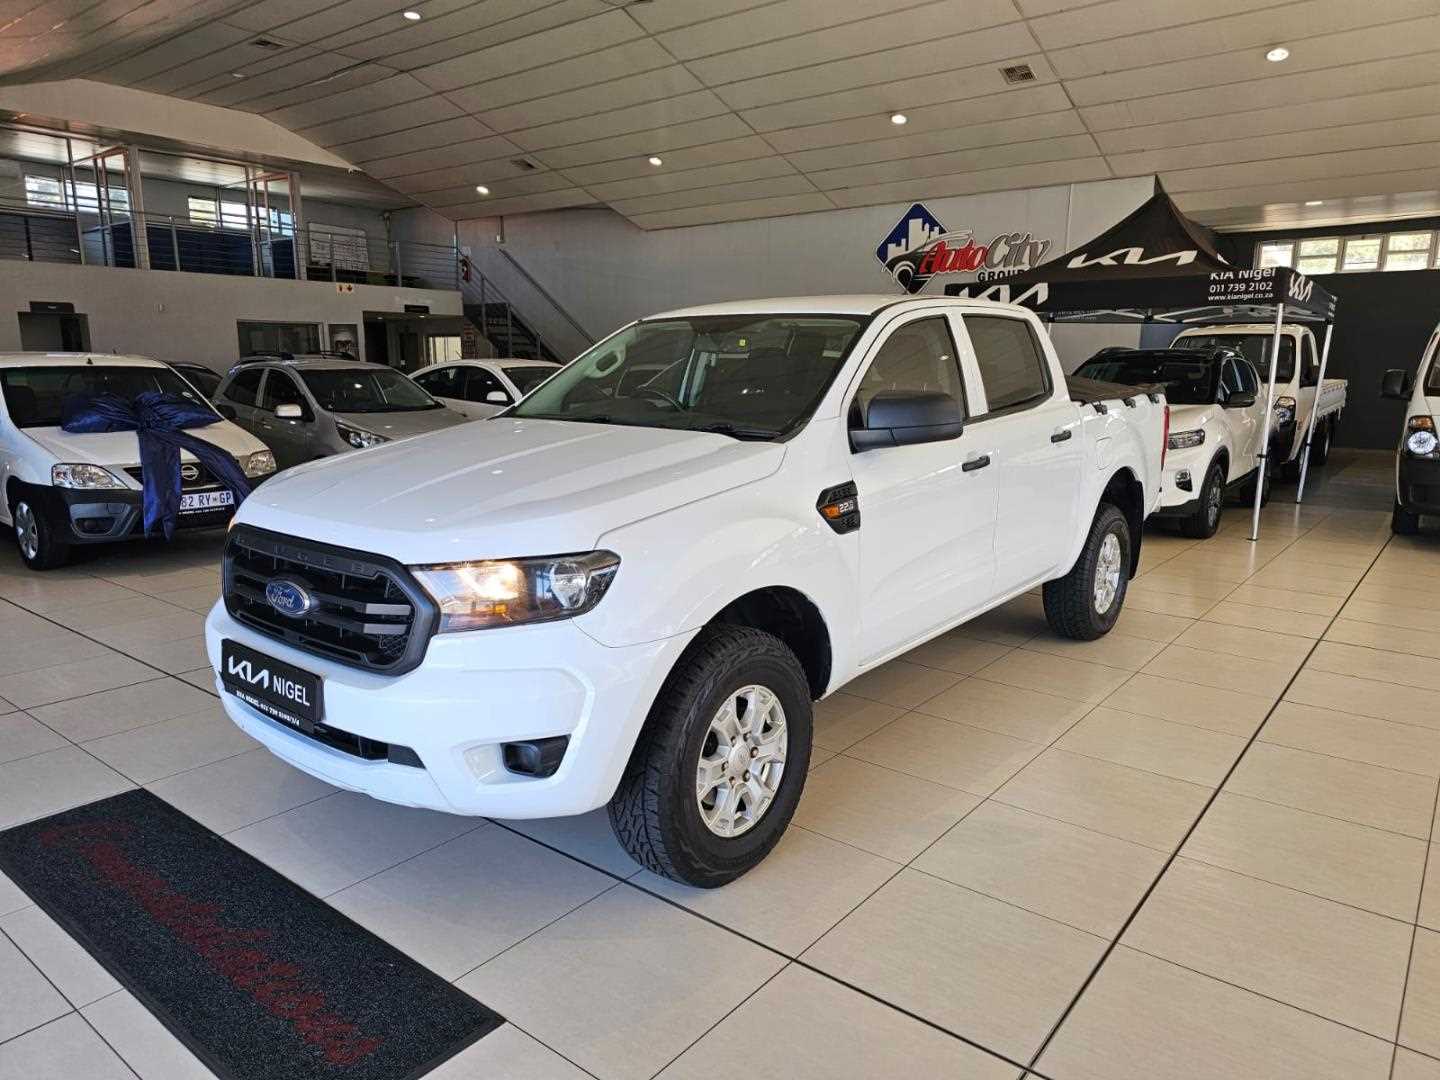 2020 Ford Ranger My20 2.2 Tdci Xl 4X2 D Cab for sale - 337604